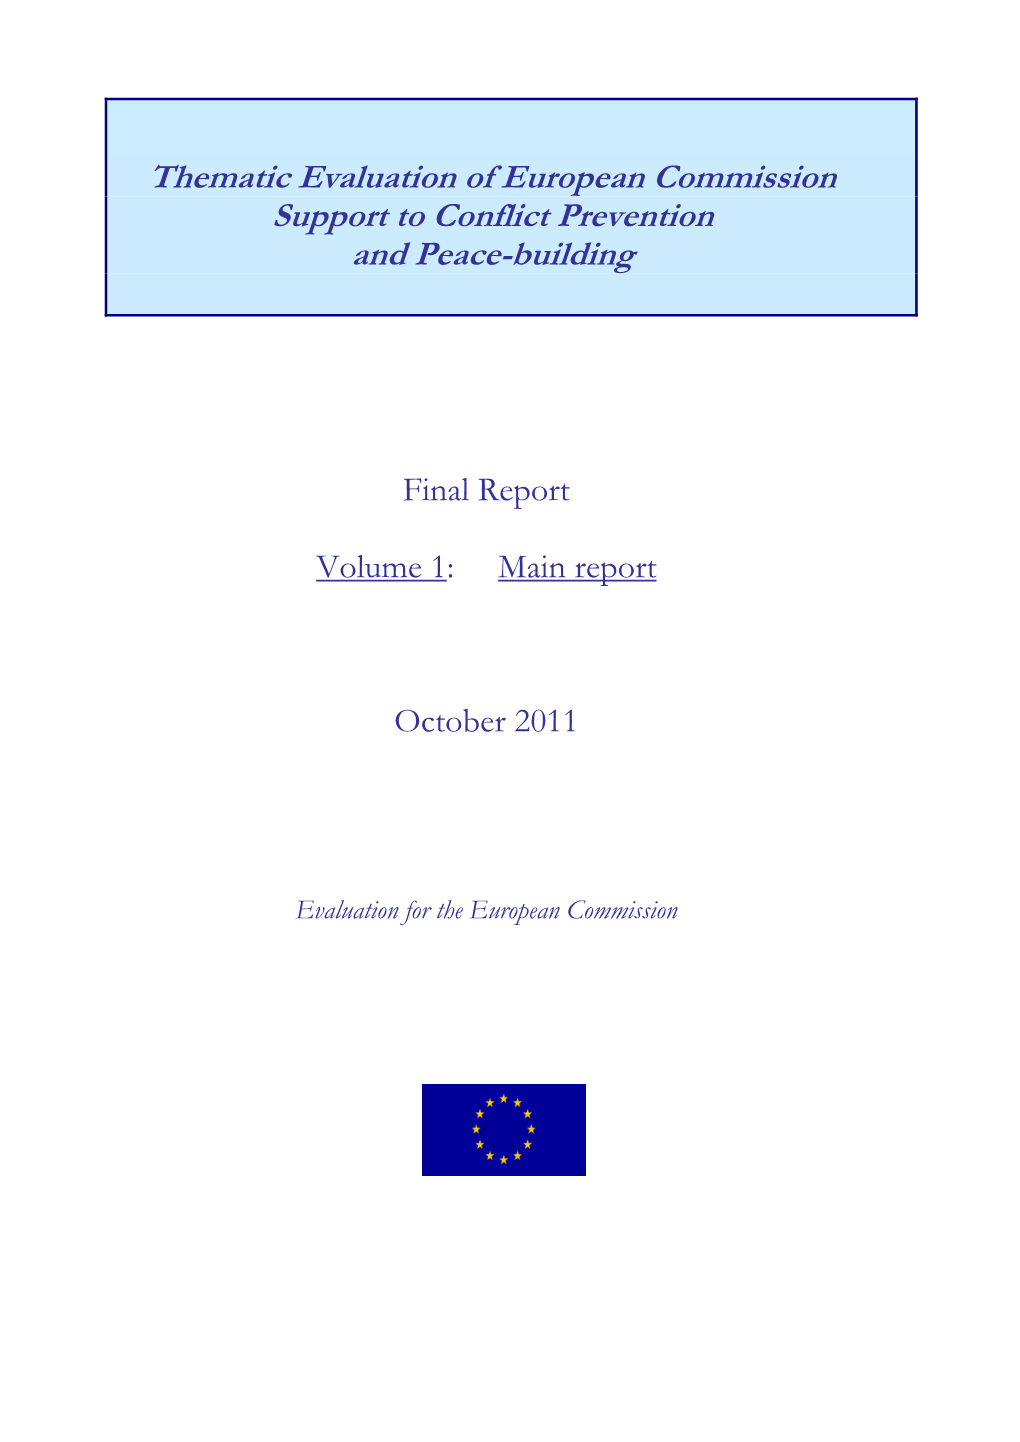 Thematic Evaluation of European Commission Support to Conflict Prevention and Peace-Building